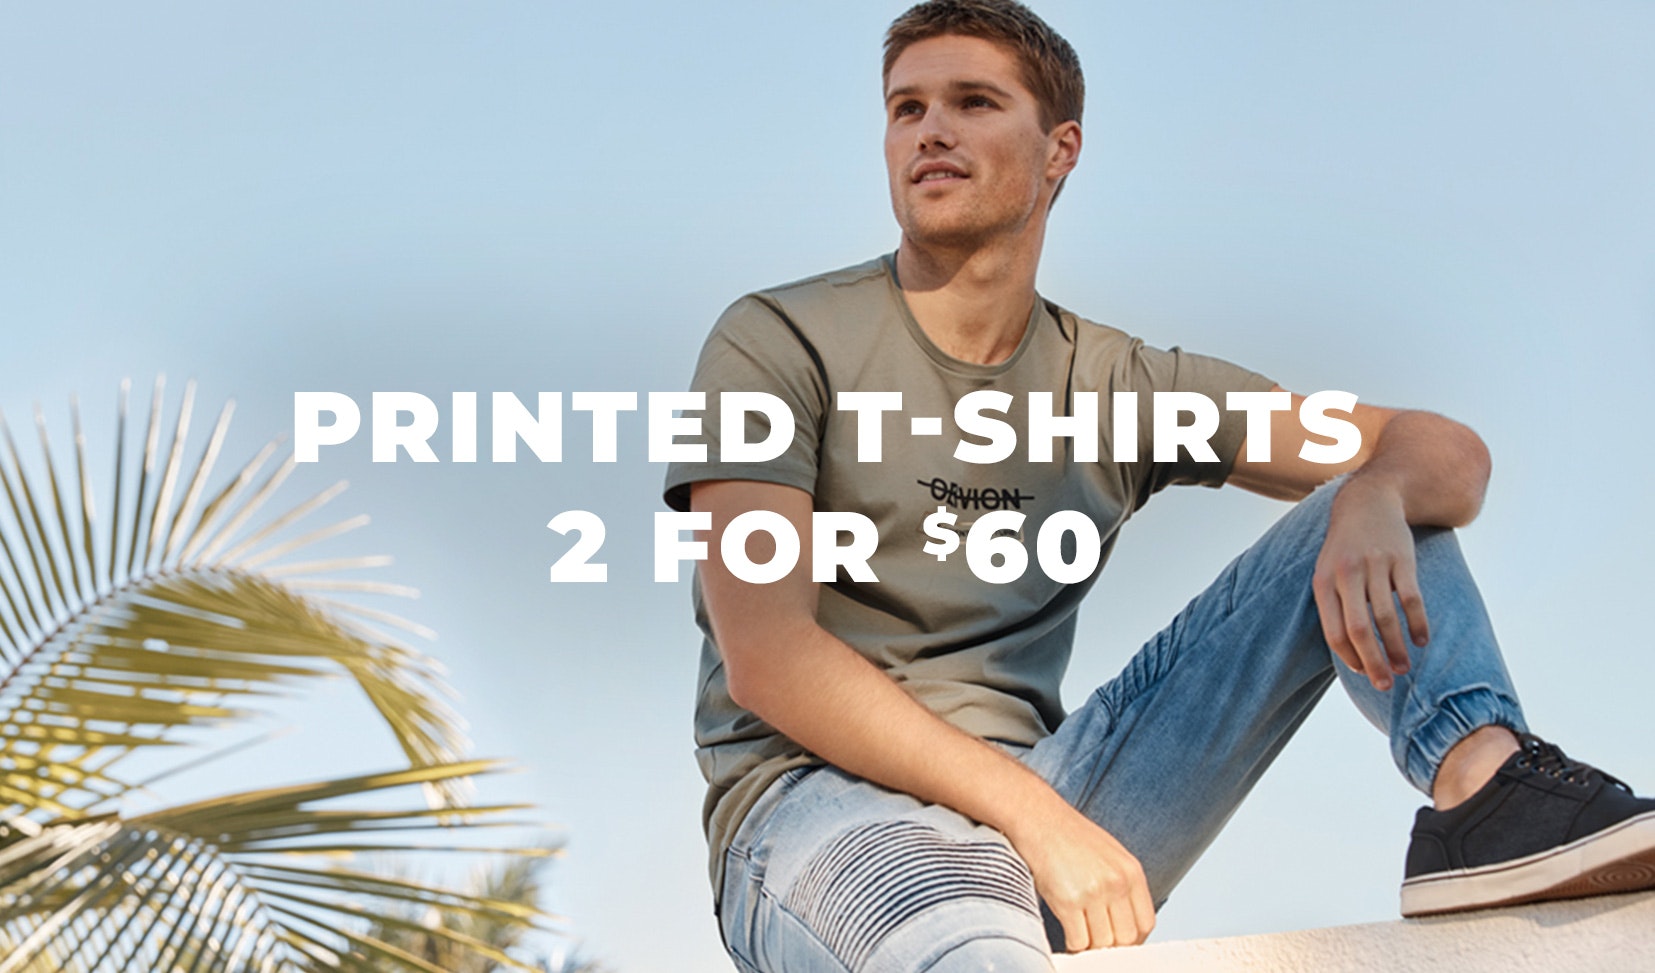 2 for 60 printed t-shirts